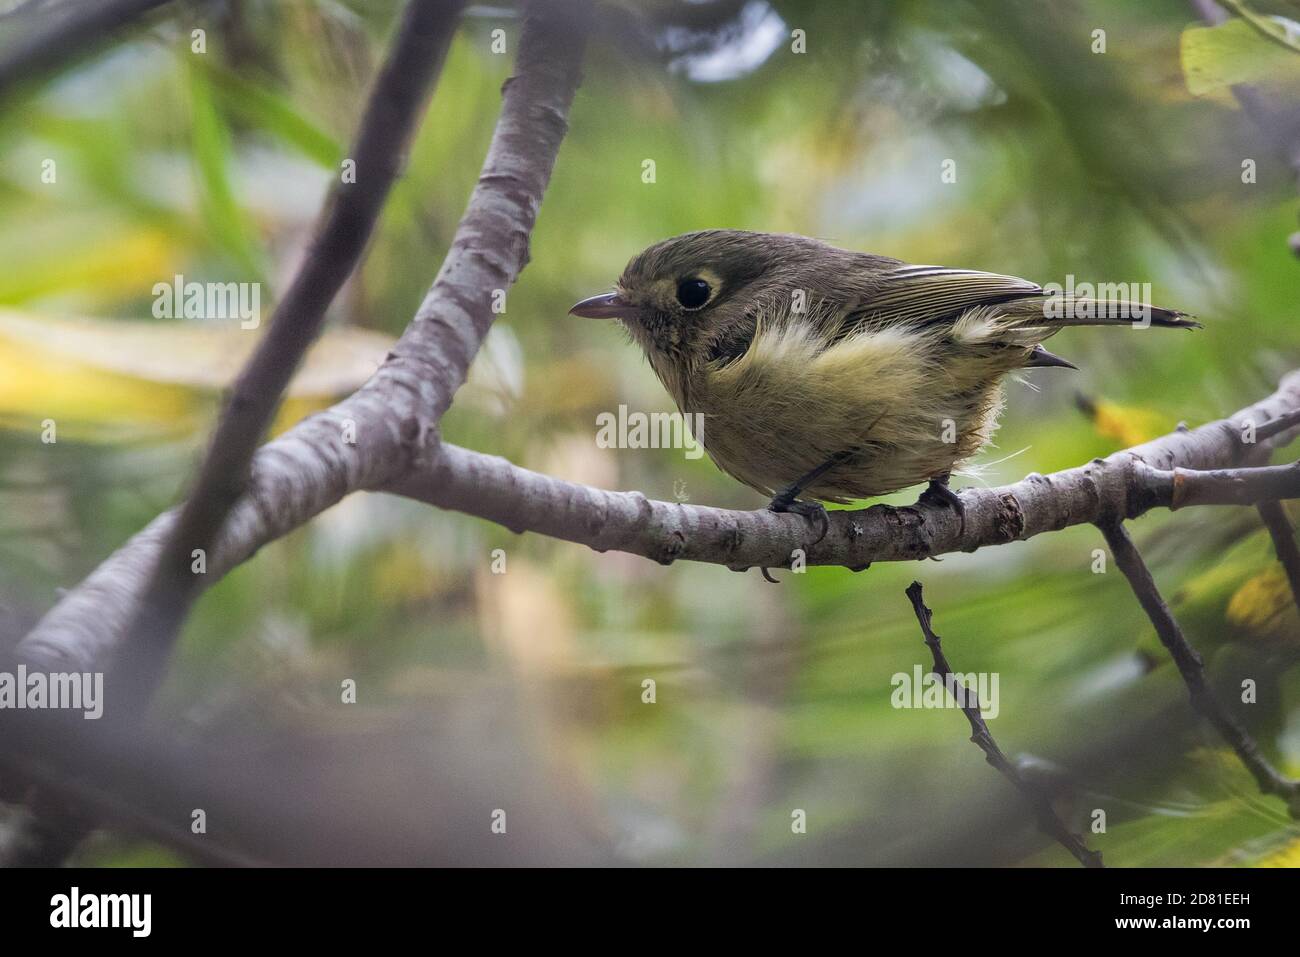 Hutton's Vireo (Vireo huttoni), a small songbird from the West Coast of North America, perches in the forest canopy. Stock Photo